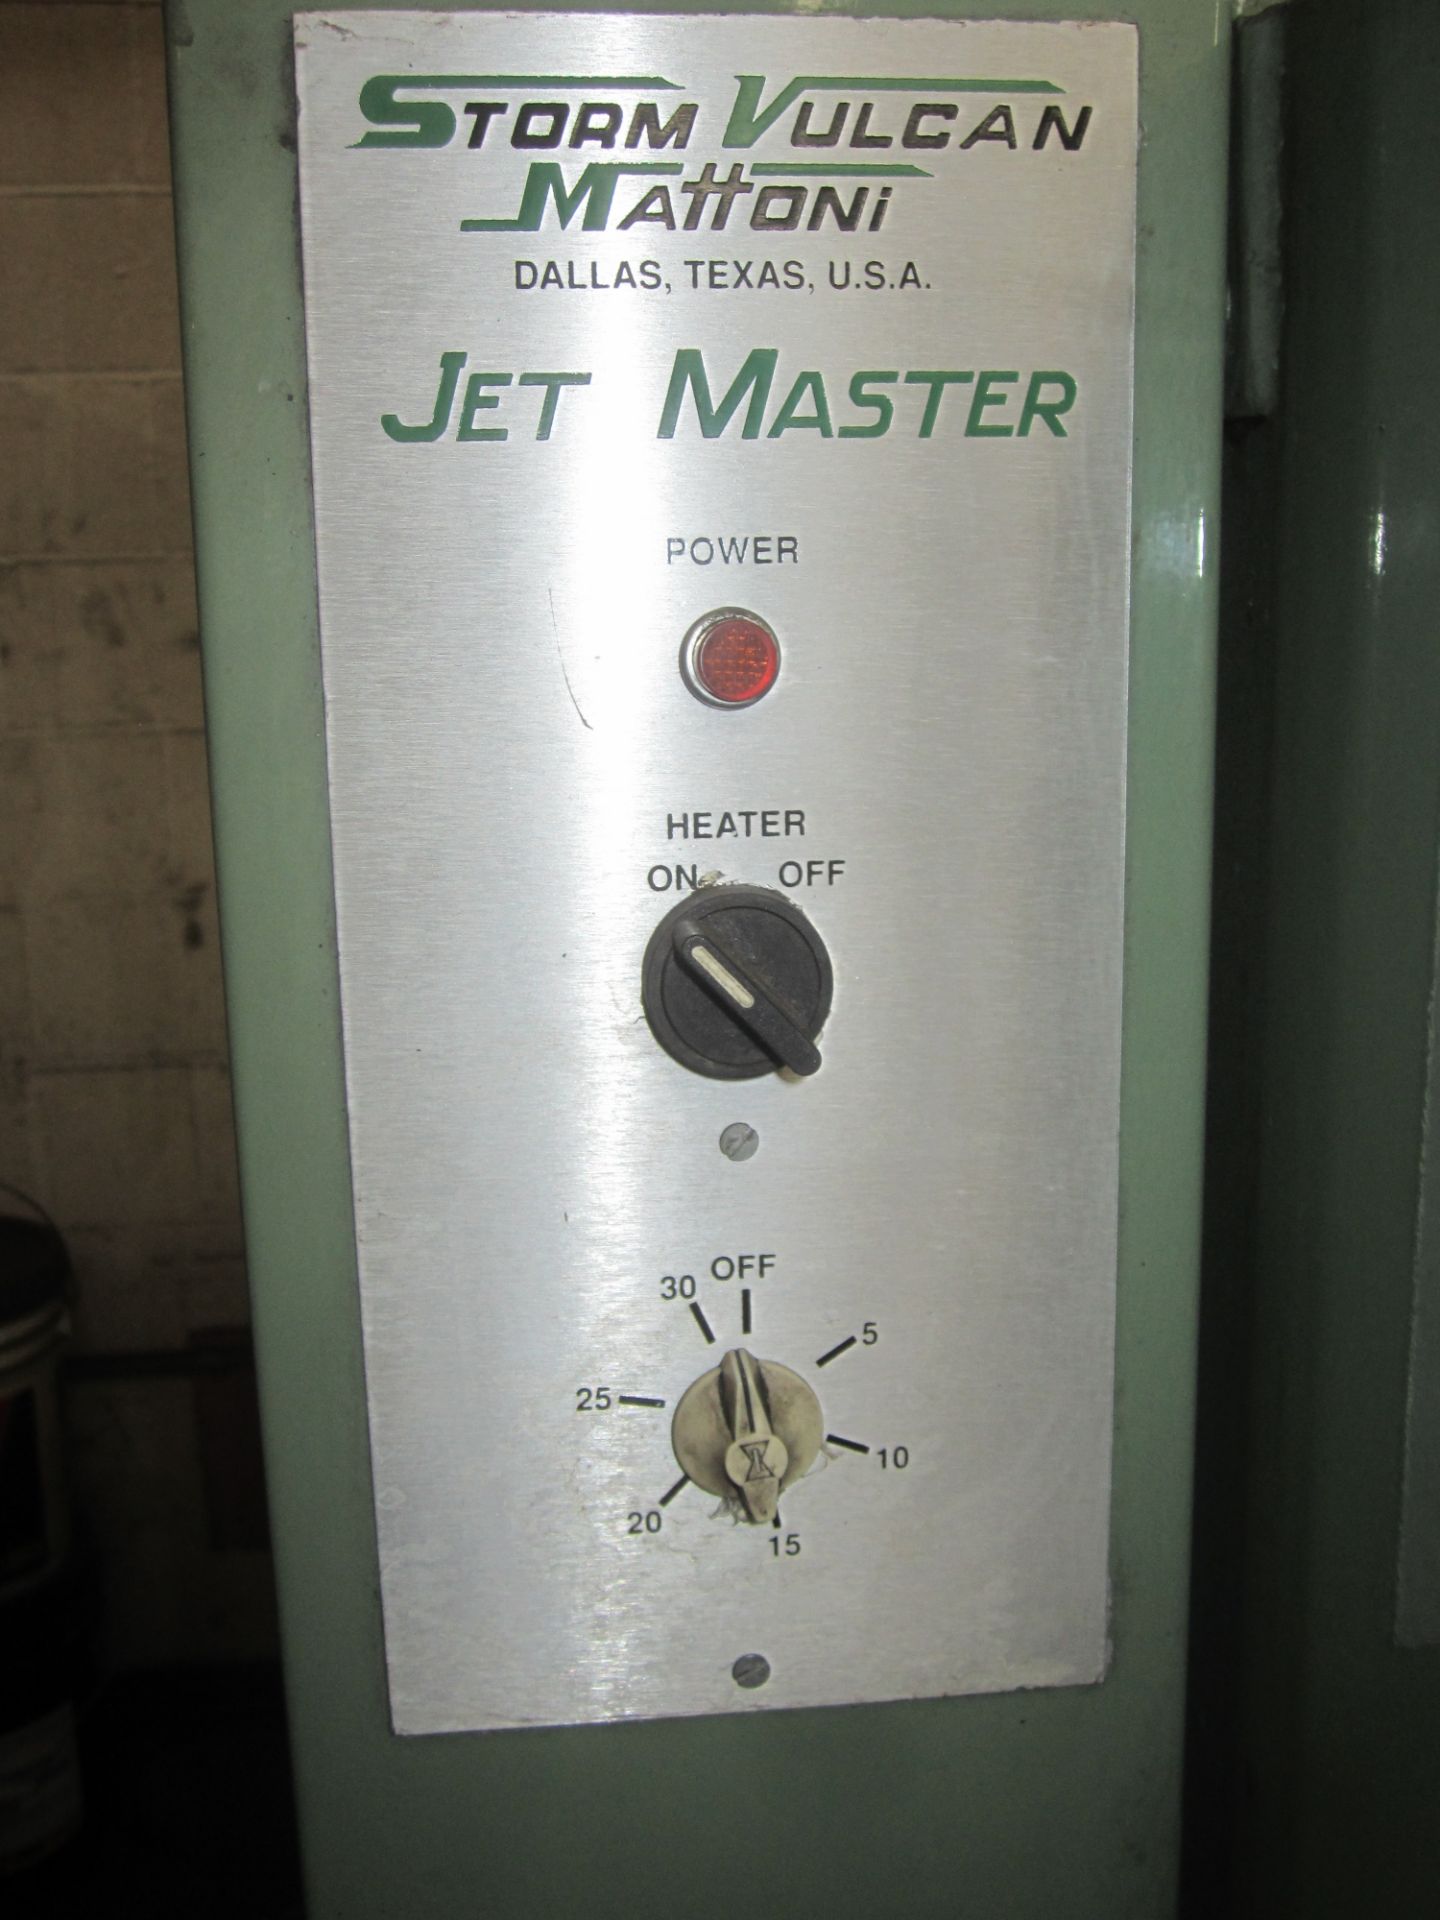 Storm Vulcan Mattoni Model SVM60 Electric Heated Jet Master Parts Washer, s/n 509, 5 HP Pump, 24" - Image 4 of 7